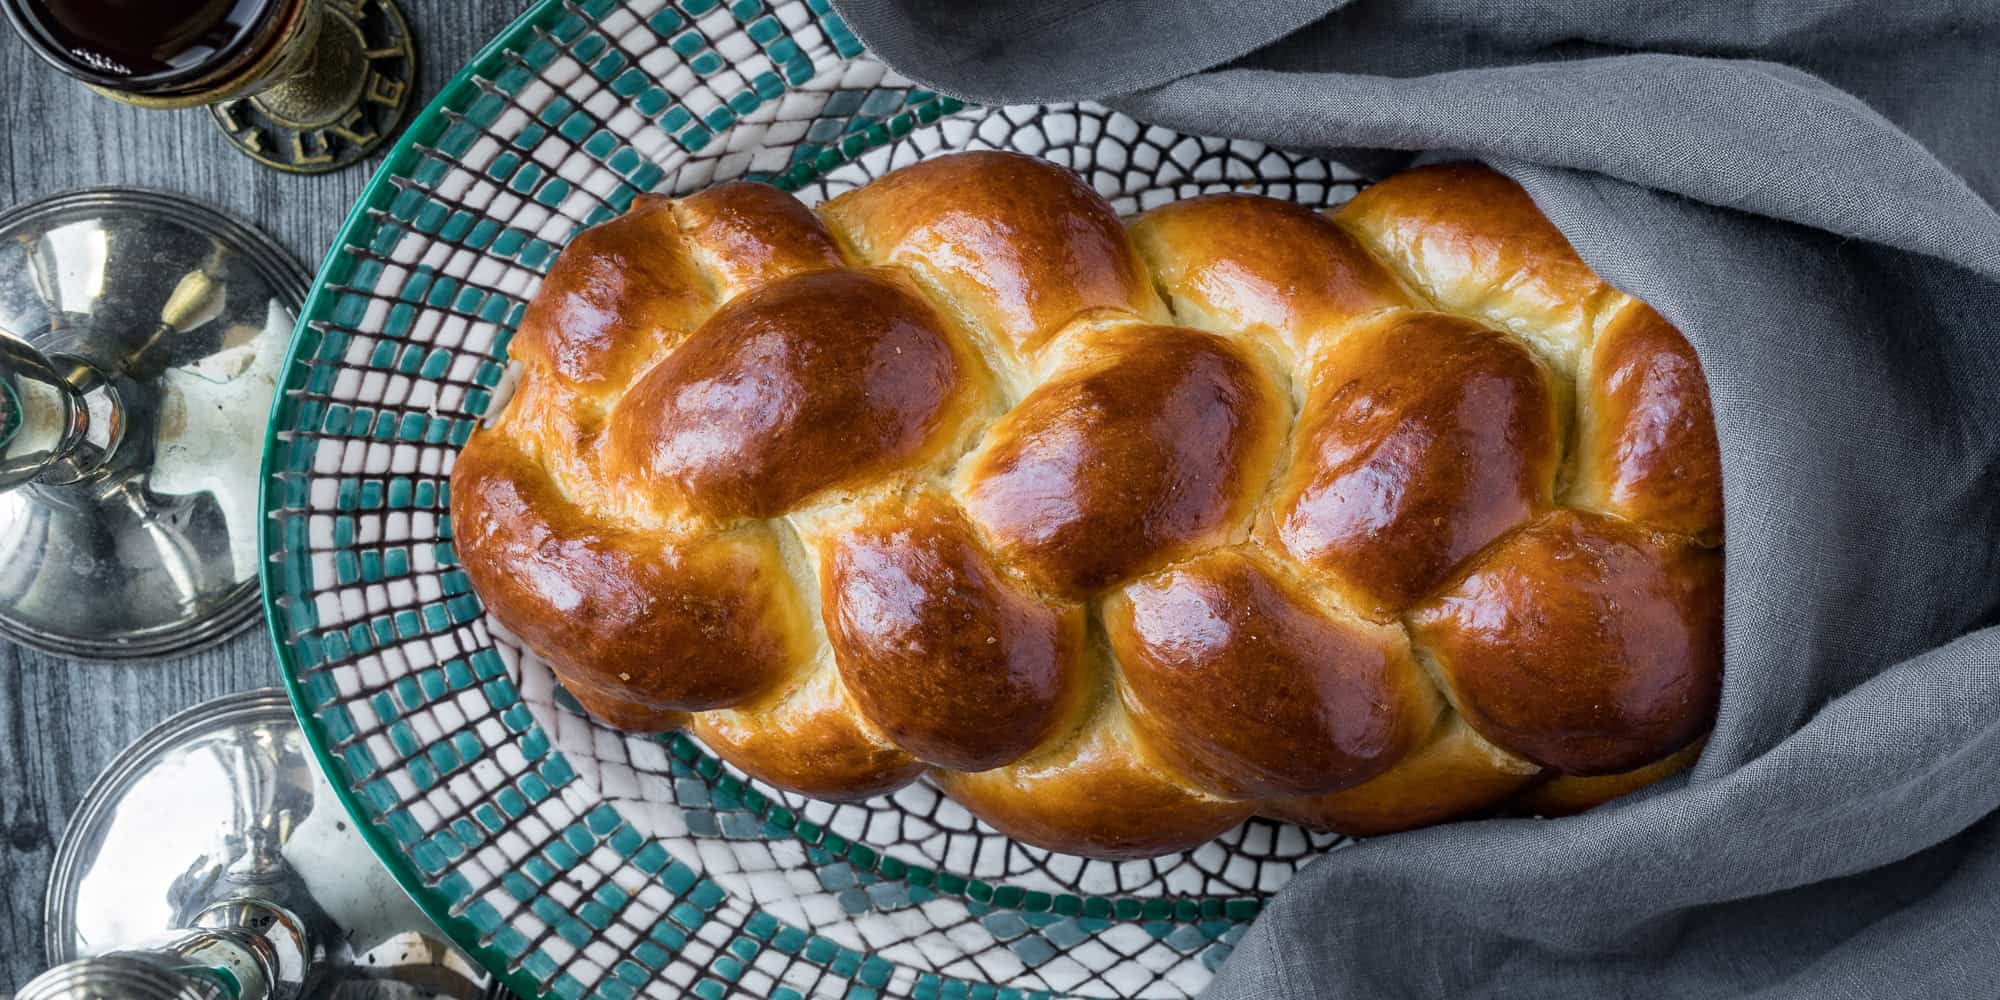 The challah of our dreams: light, fluffy, perfectly chewy - Potluckiest